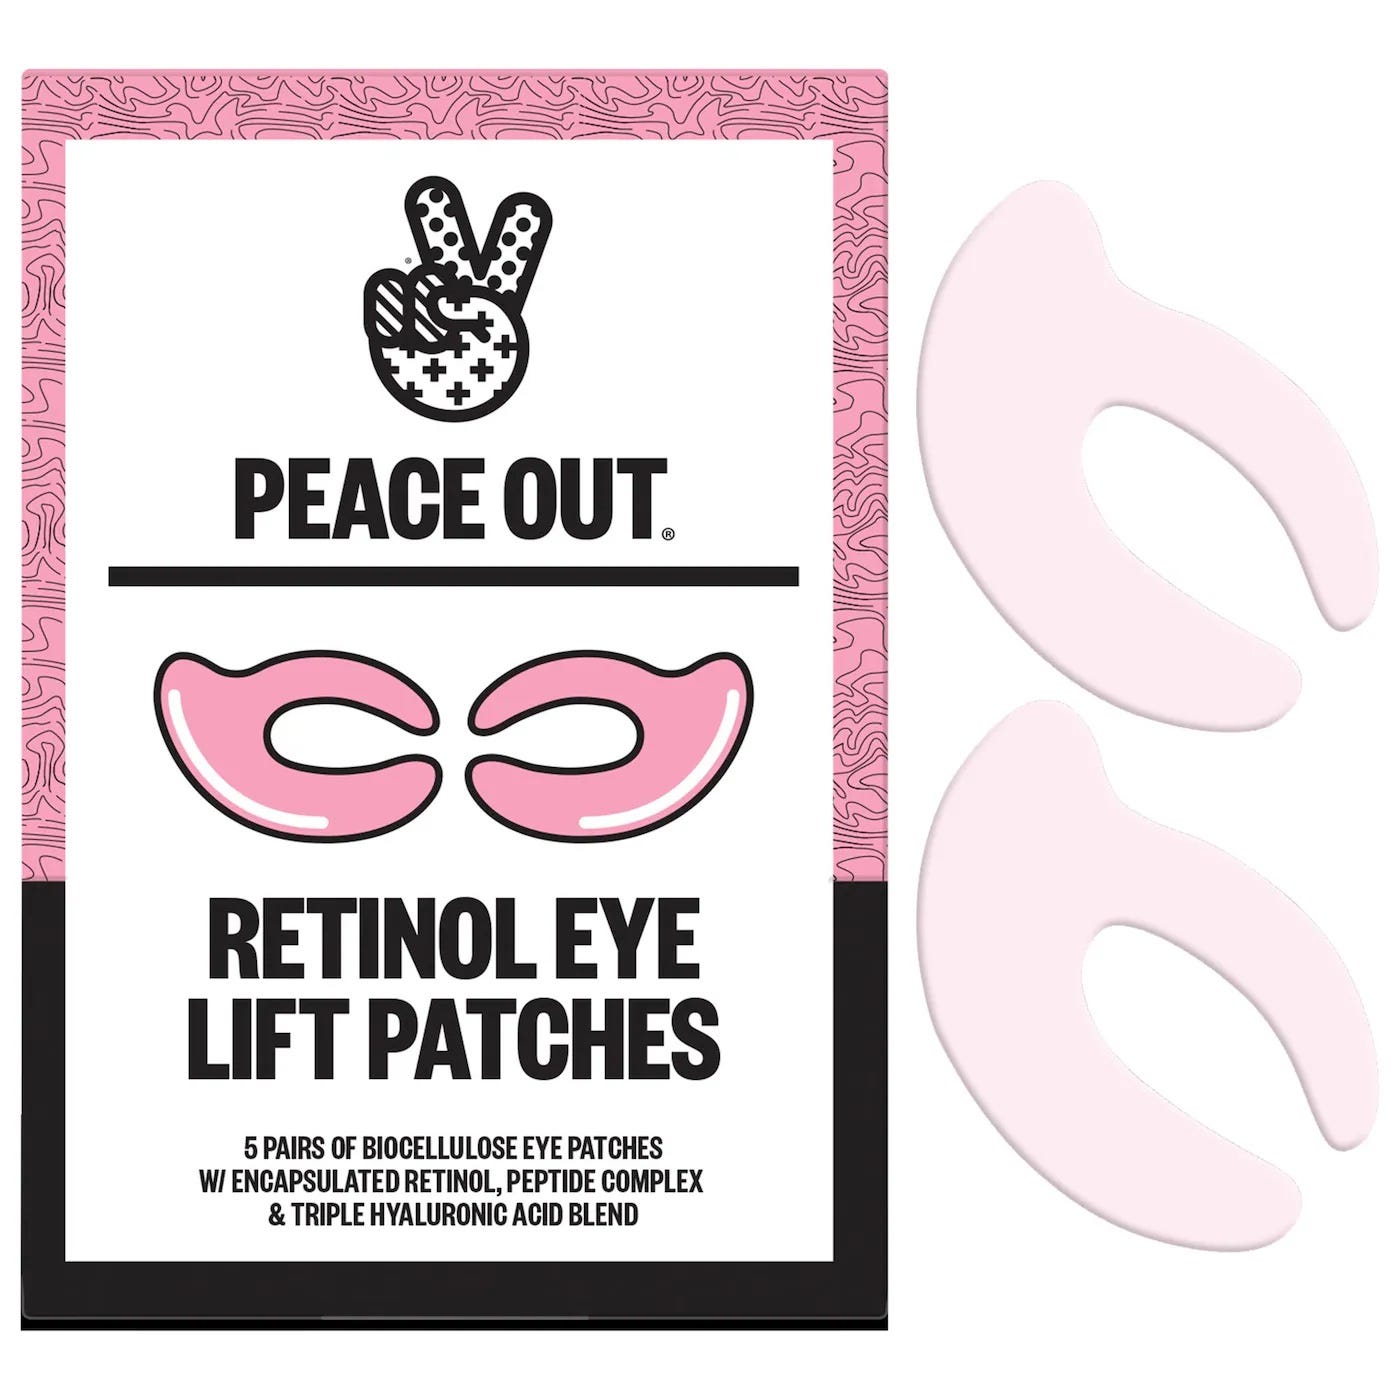 peace out retinol eye lift patches